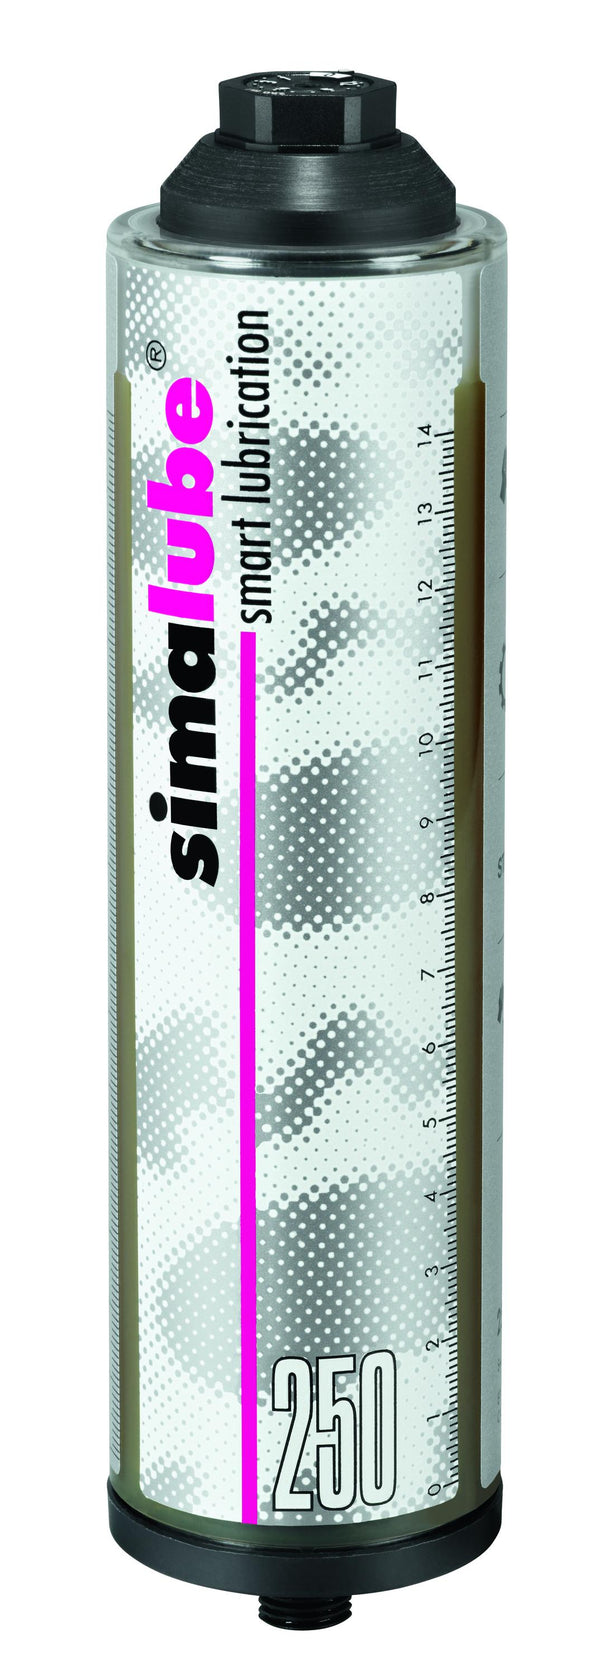 Simalube lubrication cartridge filled with high temp. chain oil